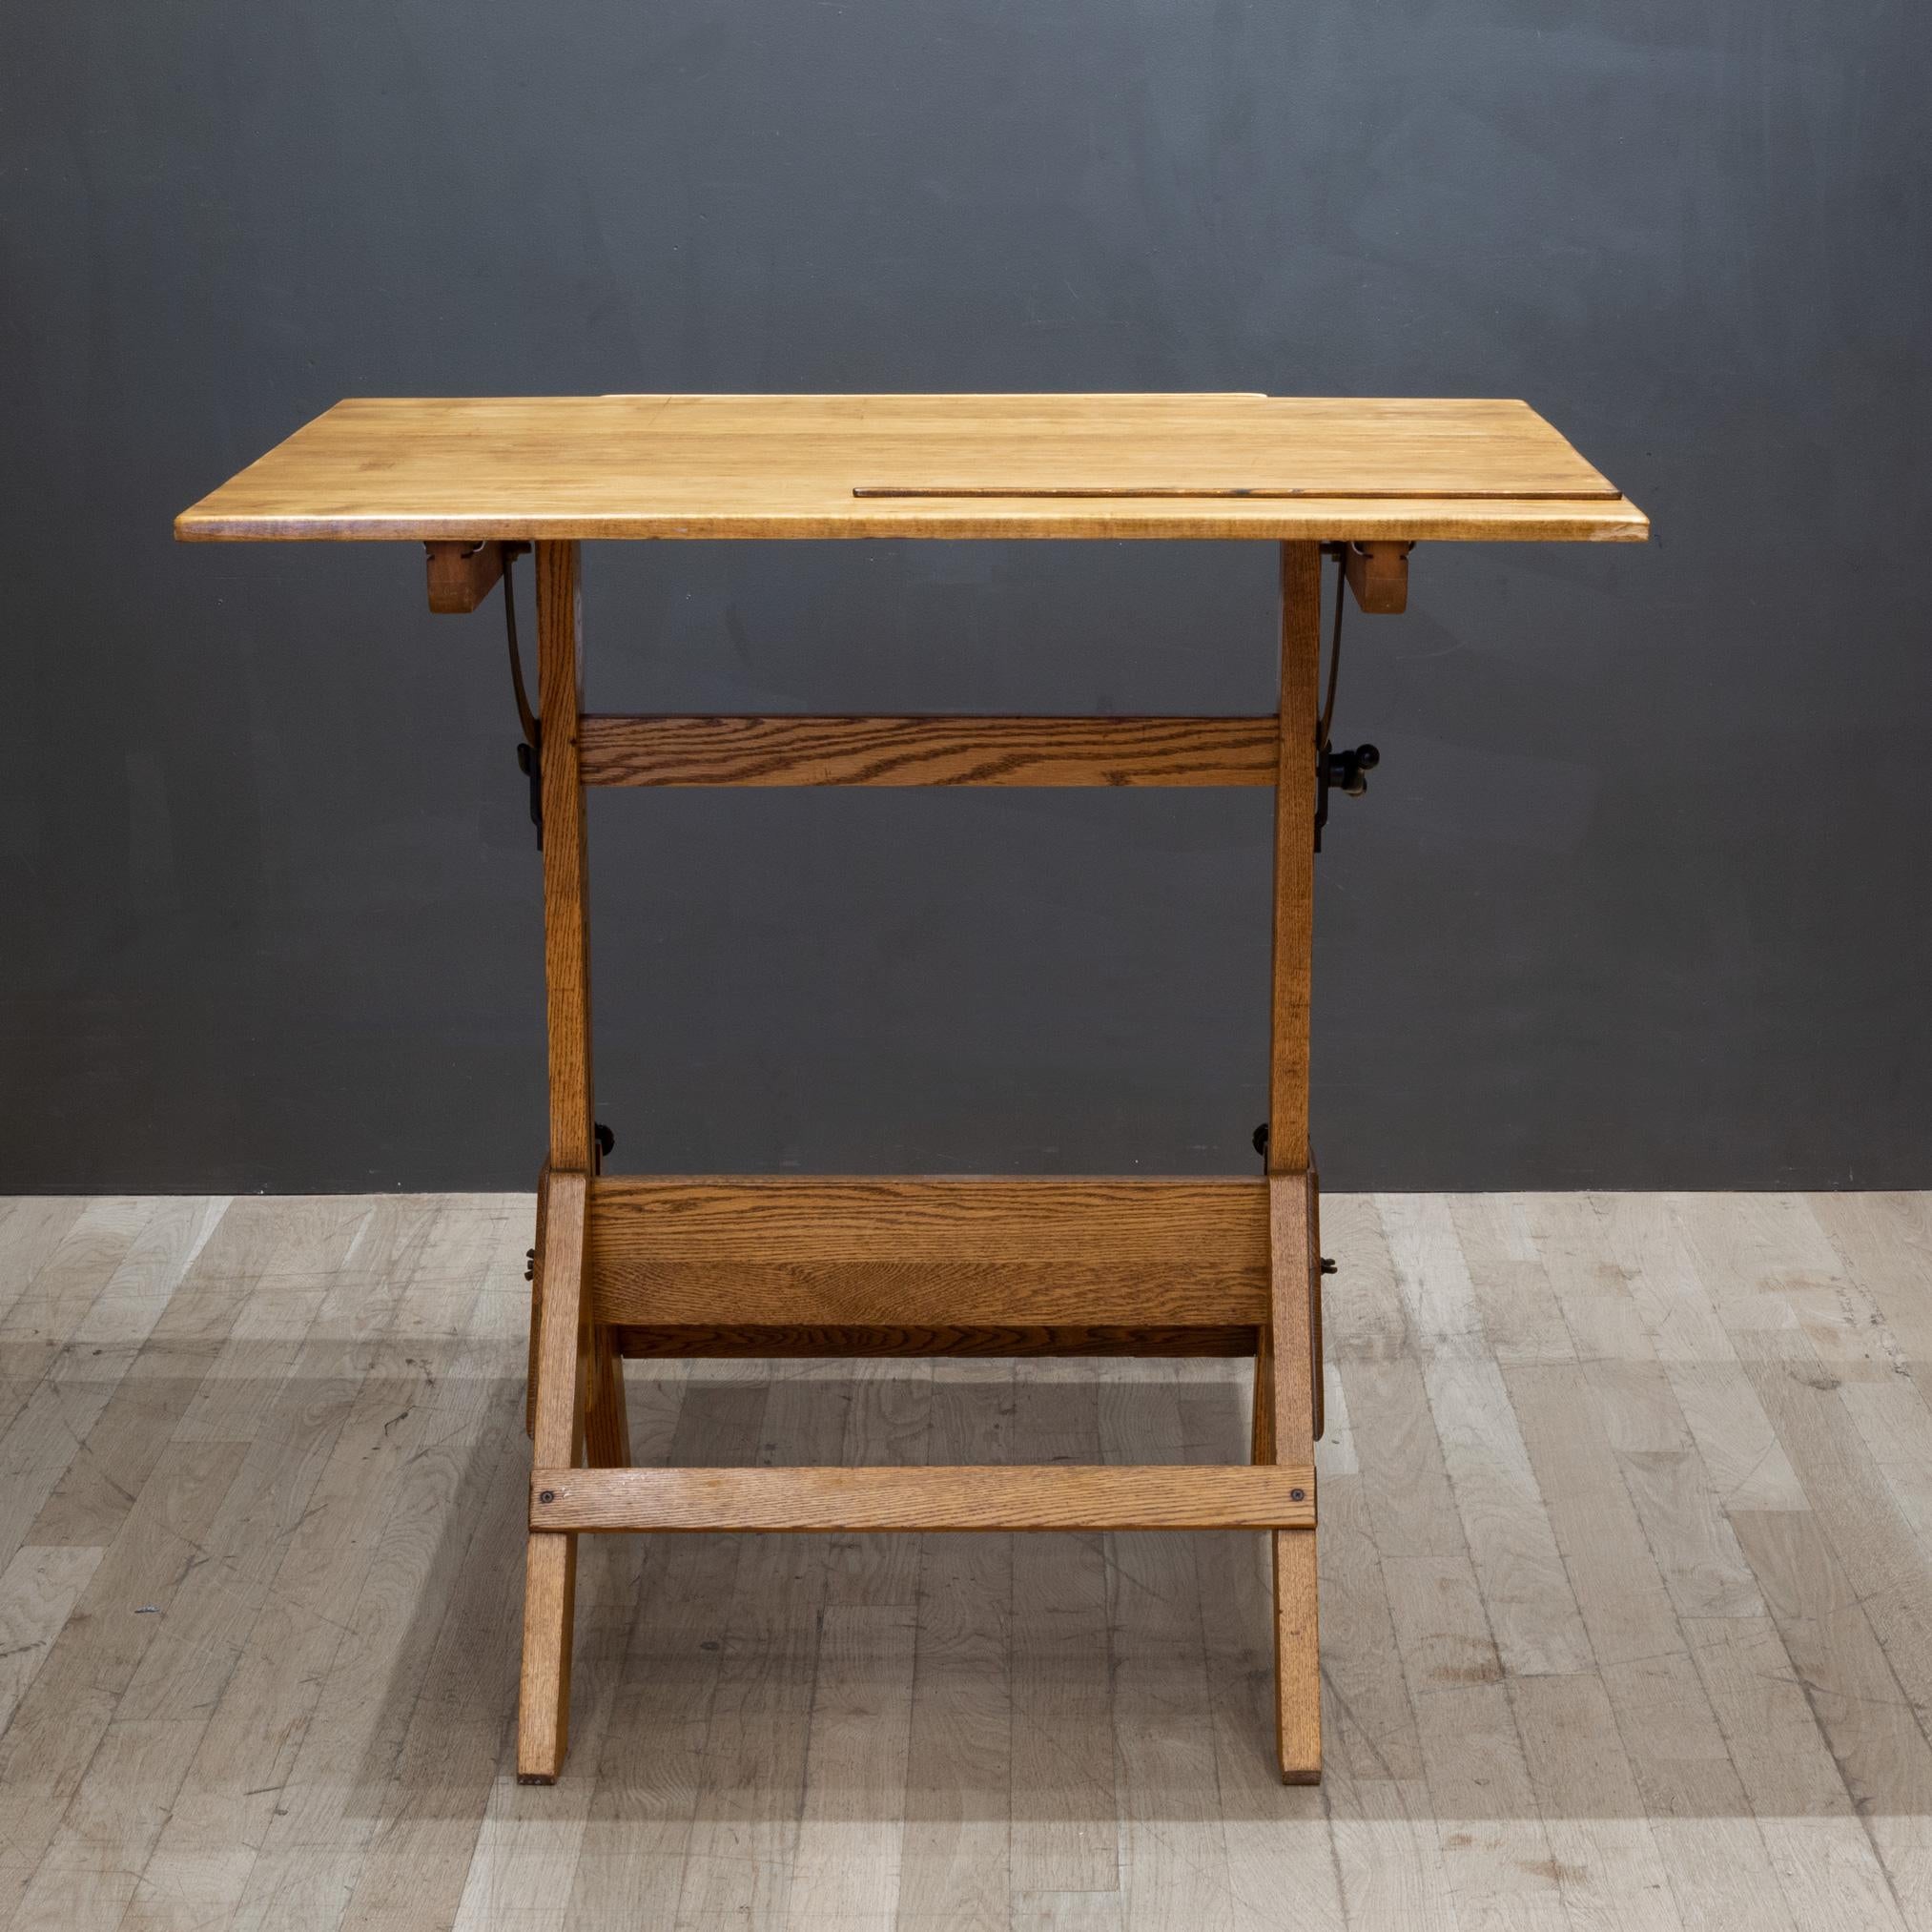 20th Century Adjustable Cast Iron and Wood Drafting Table, C.1940-1950